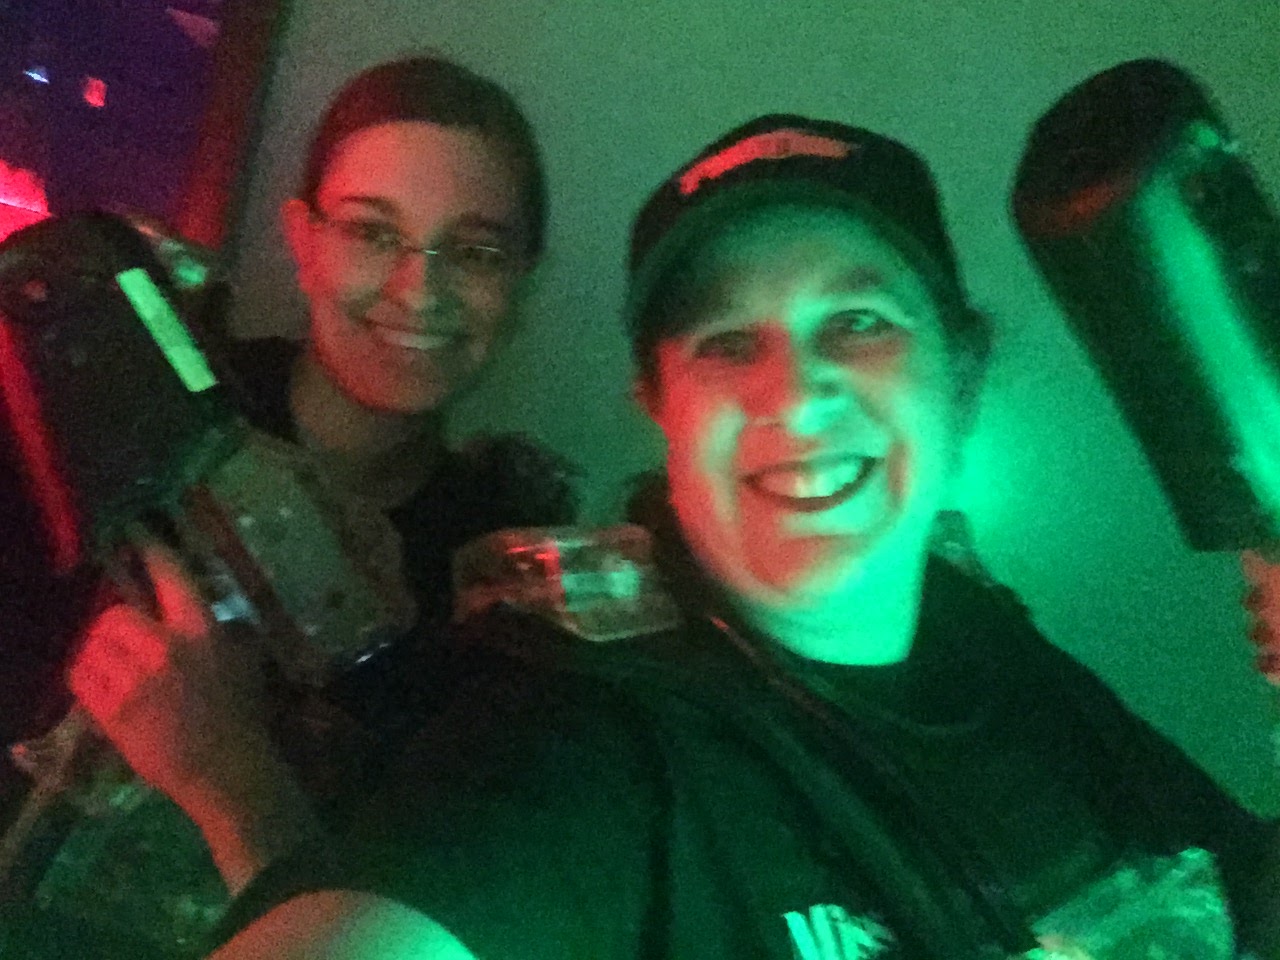 Ilion laser tag enthusiast aims for new record